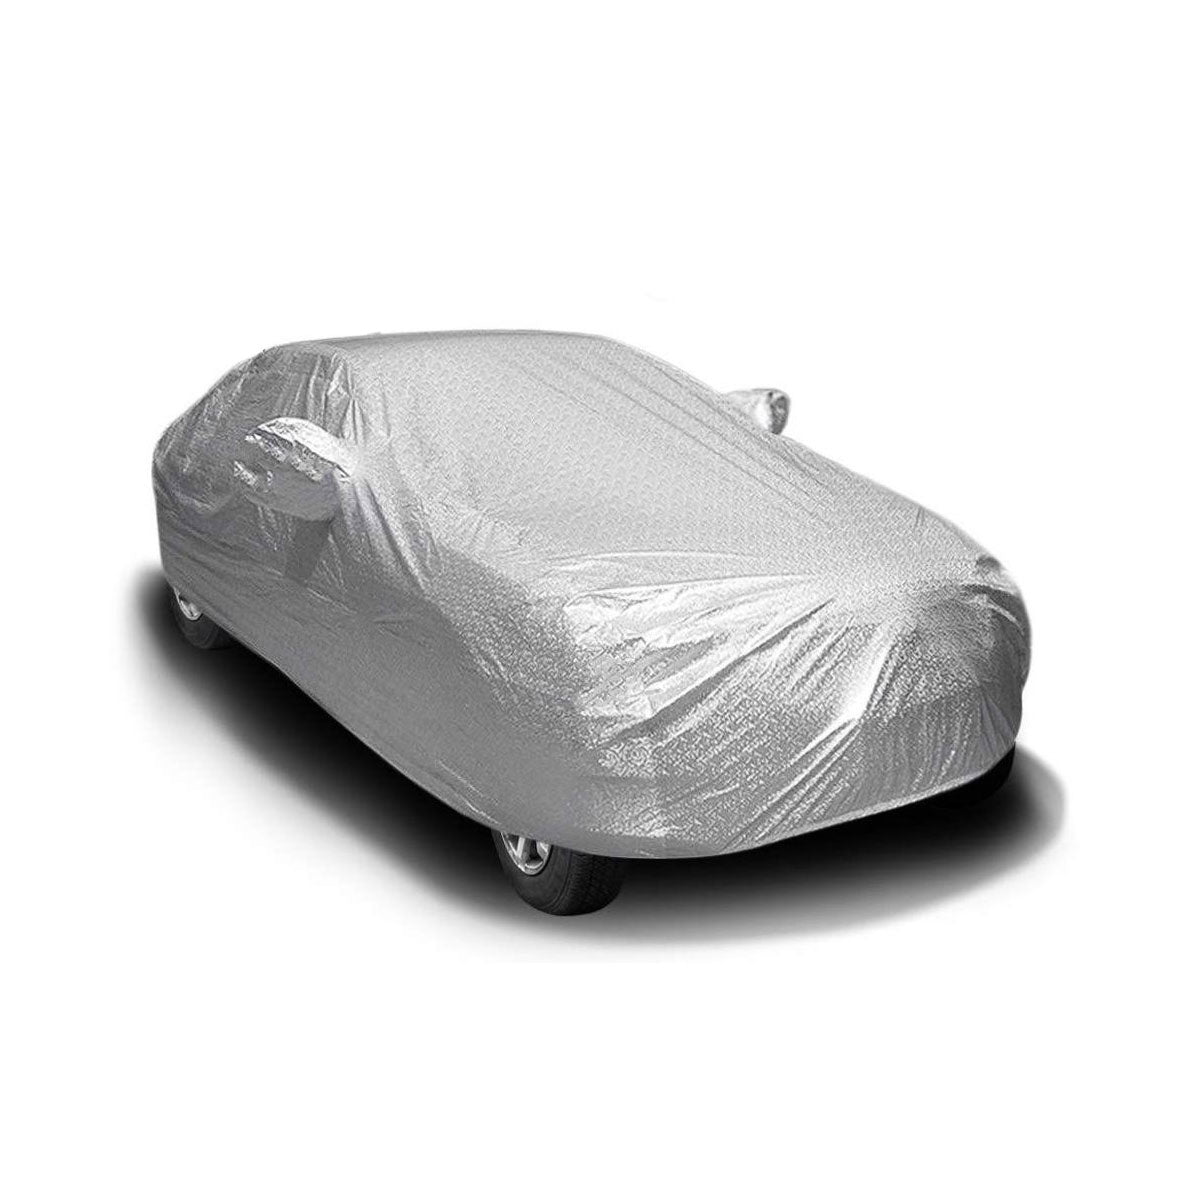 Oshotto Spyro Silver Anti Reflective, dustproof and Water Proof Car Body Cover with Mirror Pockets For Renault Captur